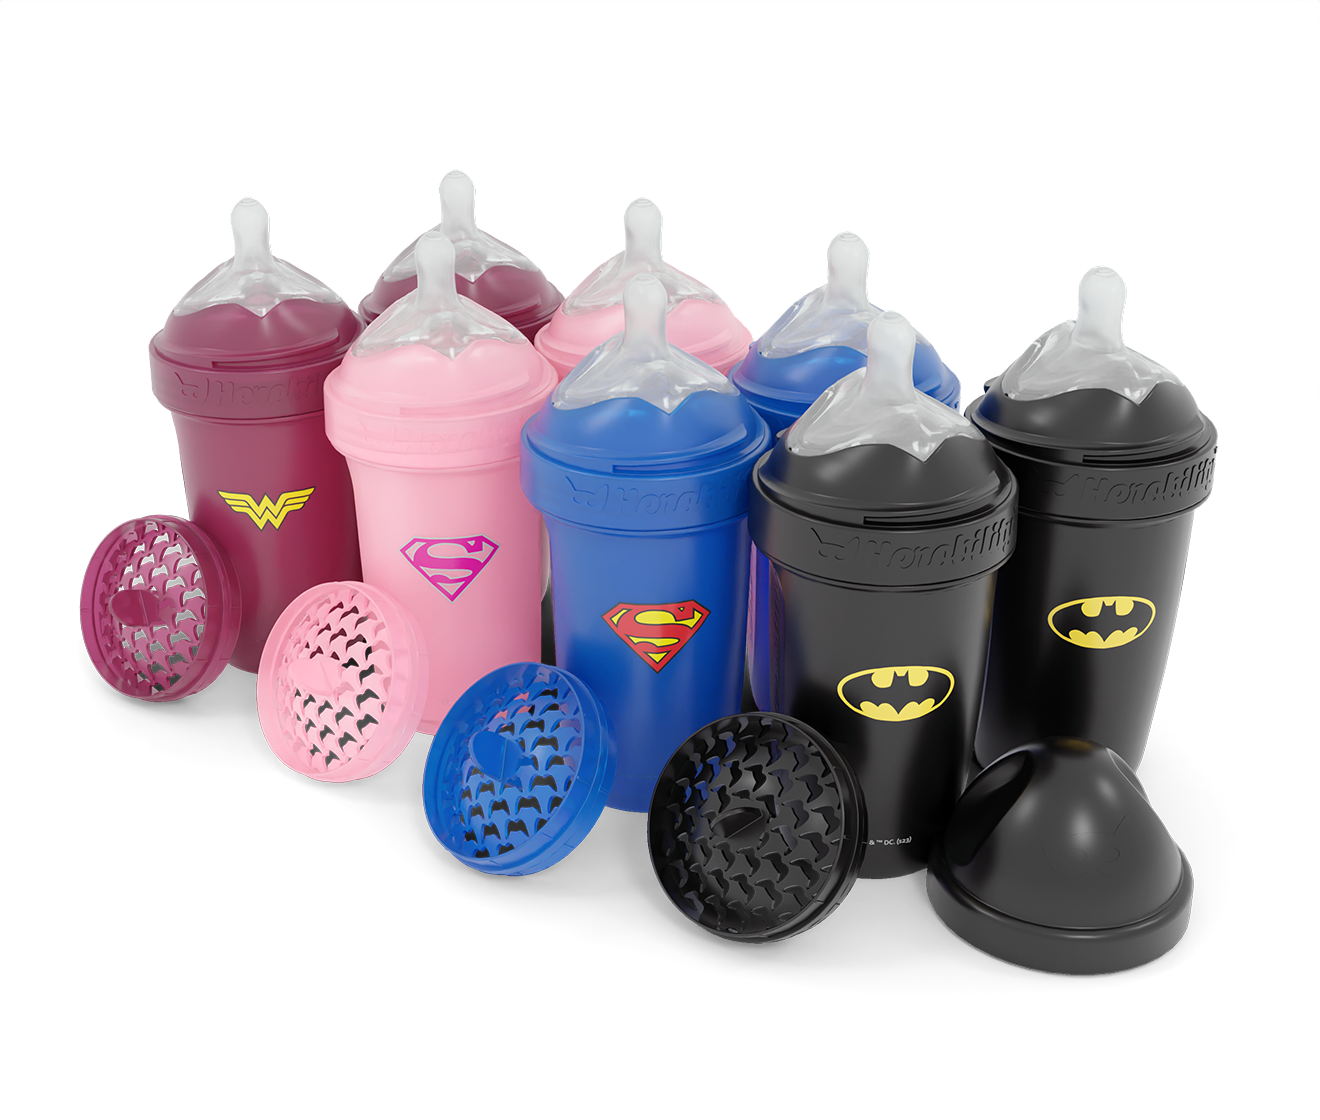 8-pack 240ml/8.5 floz DC Comics Baby Bottles with 60% discount